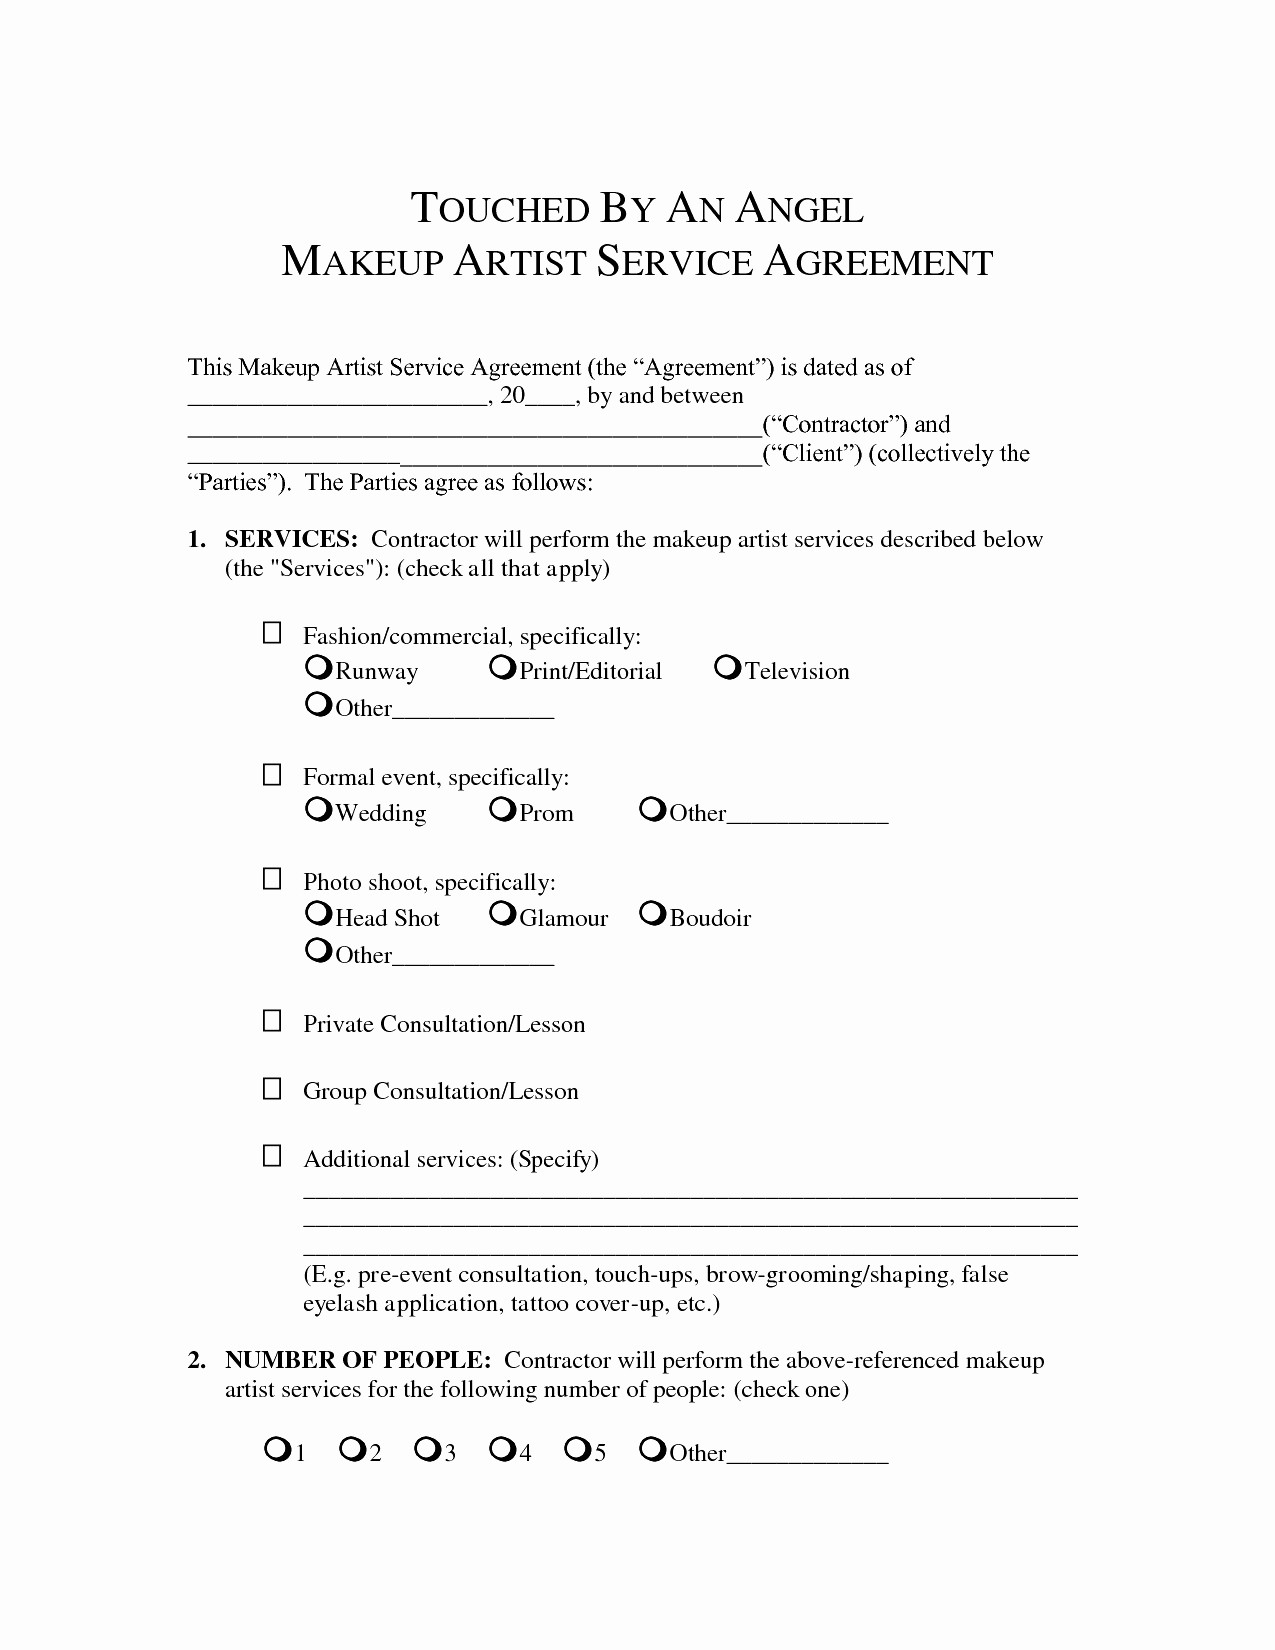 Makeup Service Contract Template Elegant Freelance Artist Document For Services